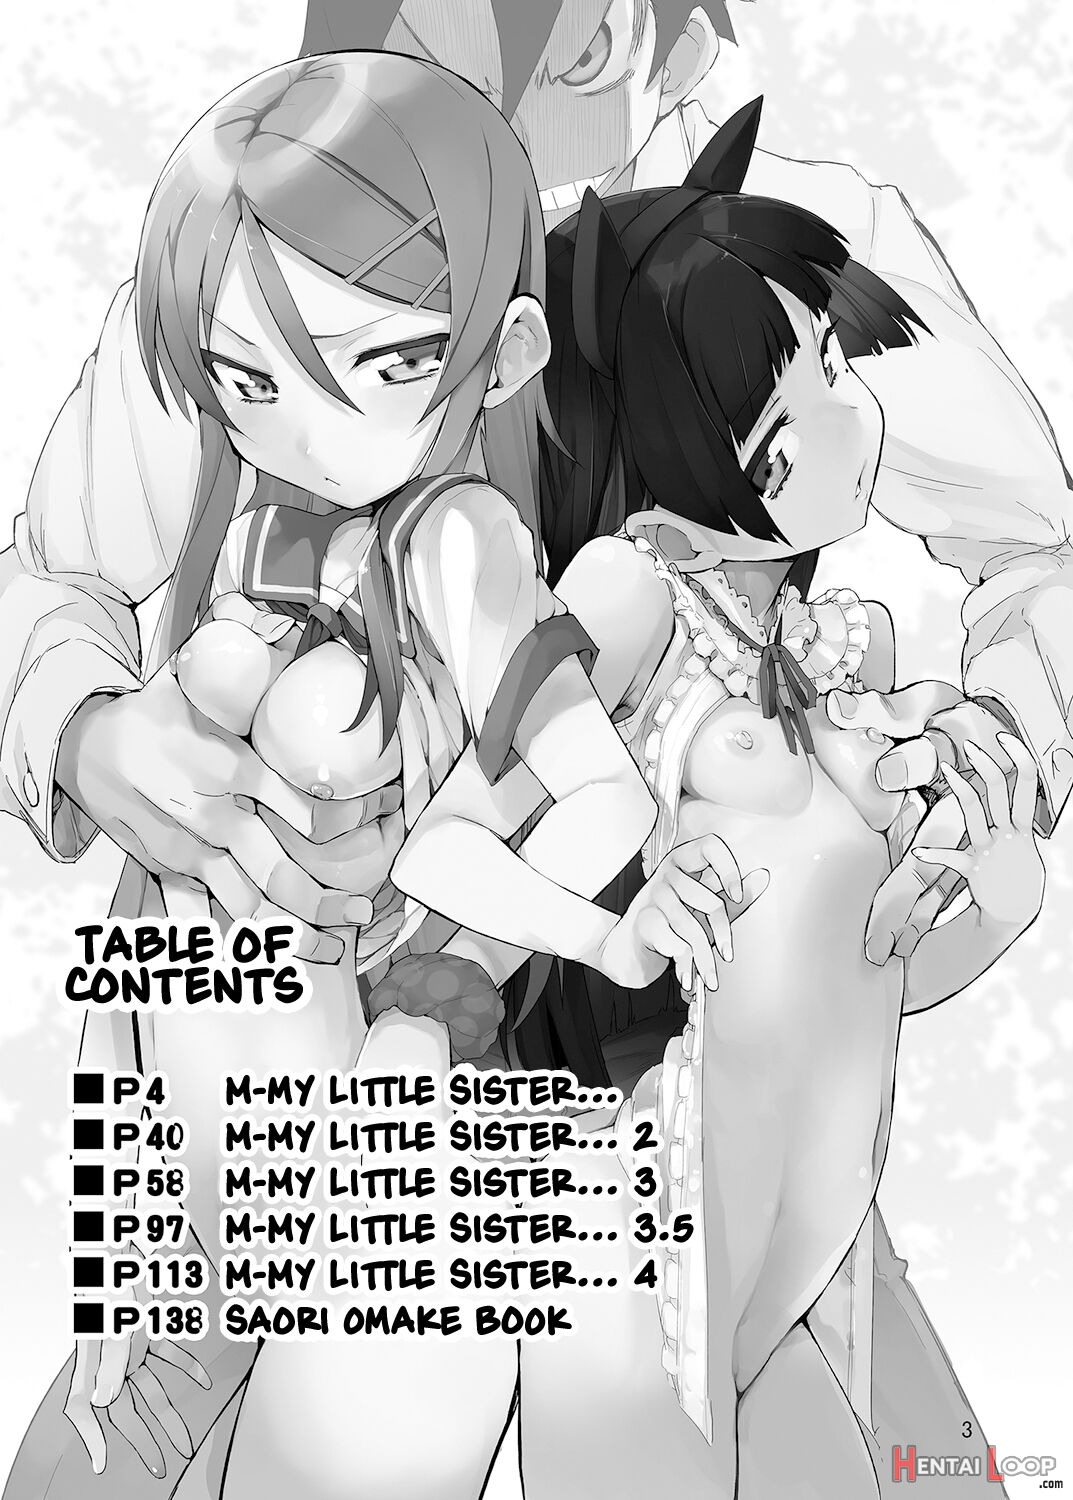 M- My Little Sister... She's... Revised Series Compilation page 2